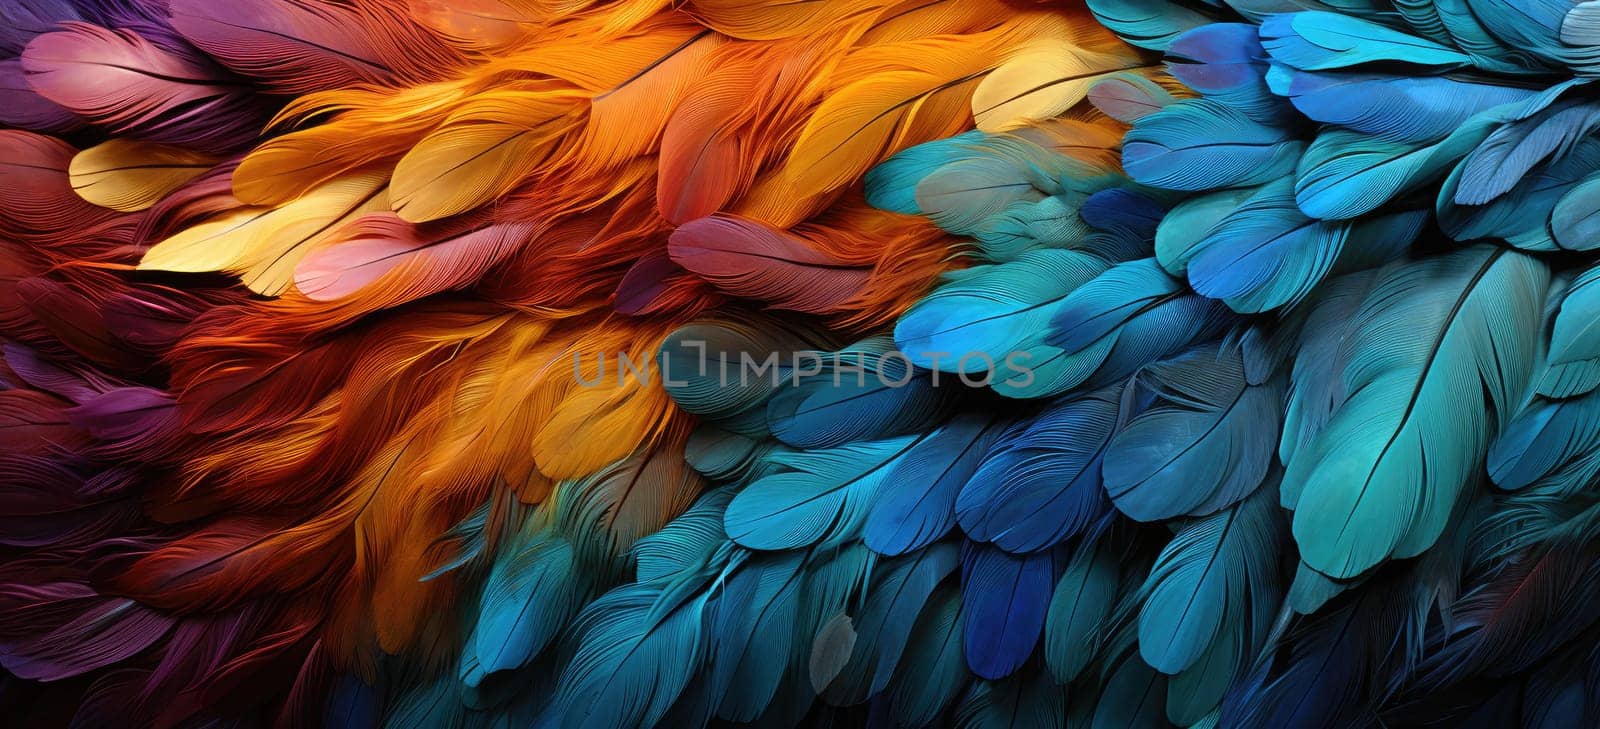 Multicolored Feathers of Different Birds: Background Abstraction by Yurich32